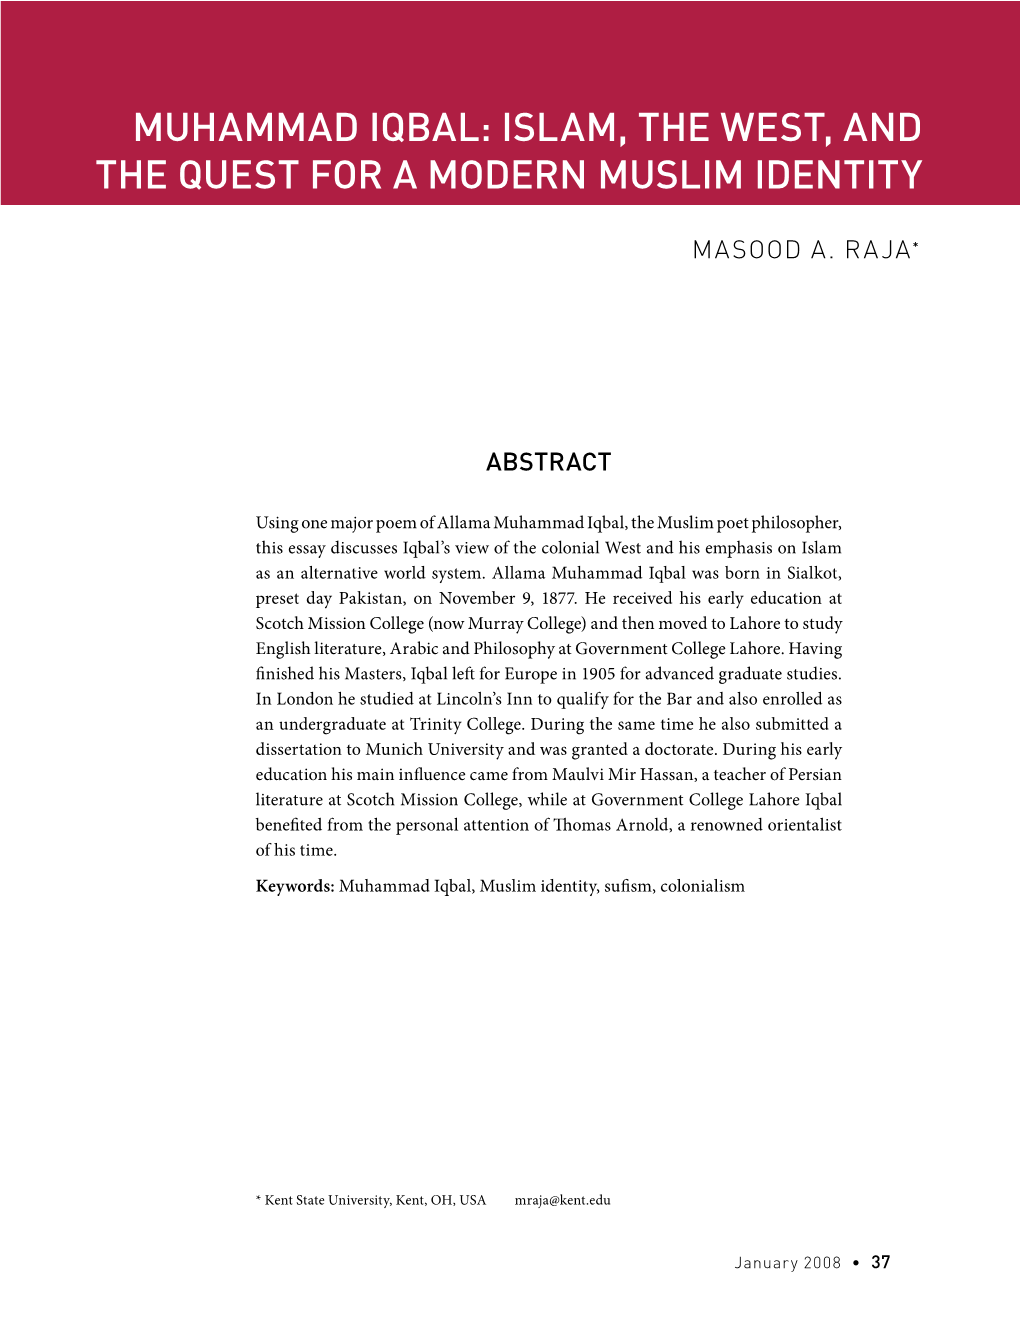 Muhammad Iqbal: Islam, the West, and the Quest for a Modern Muslim Identity • Masood A